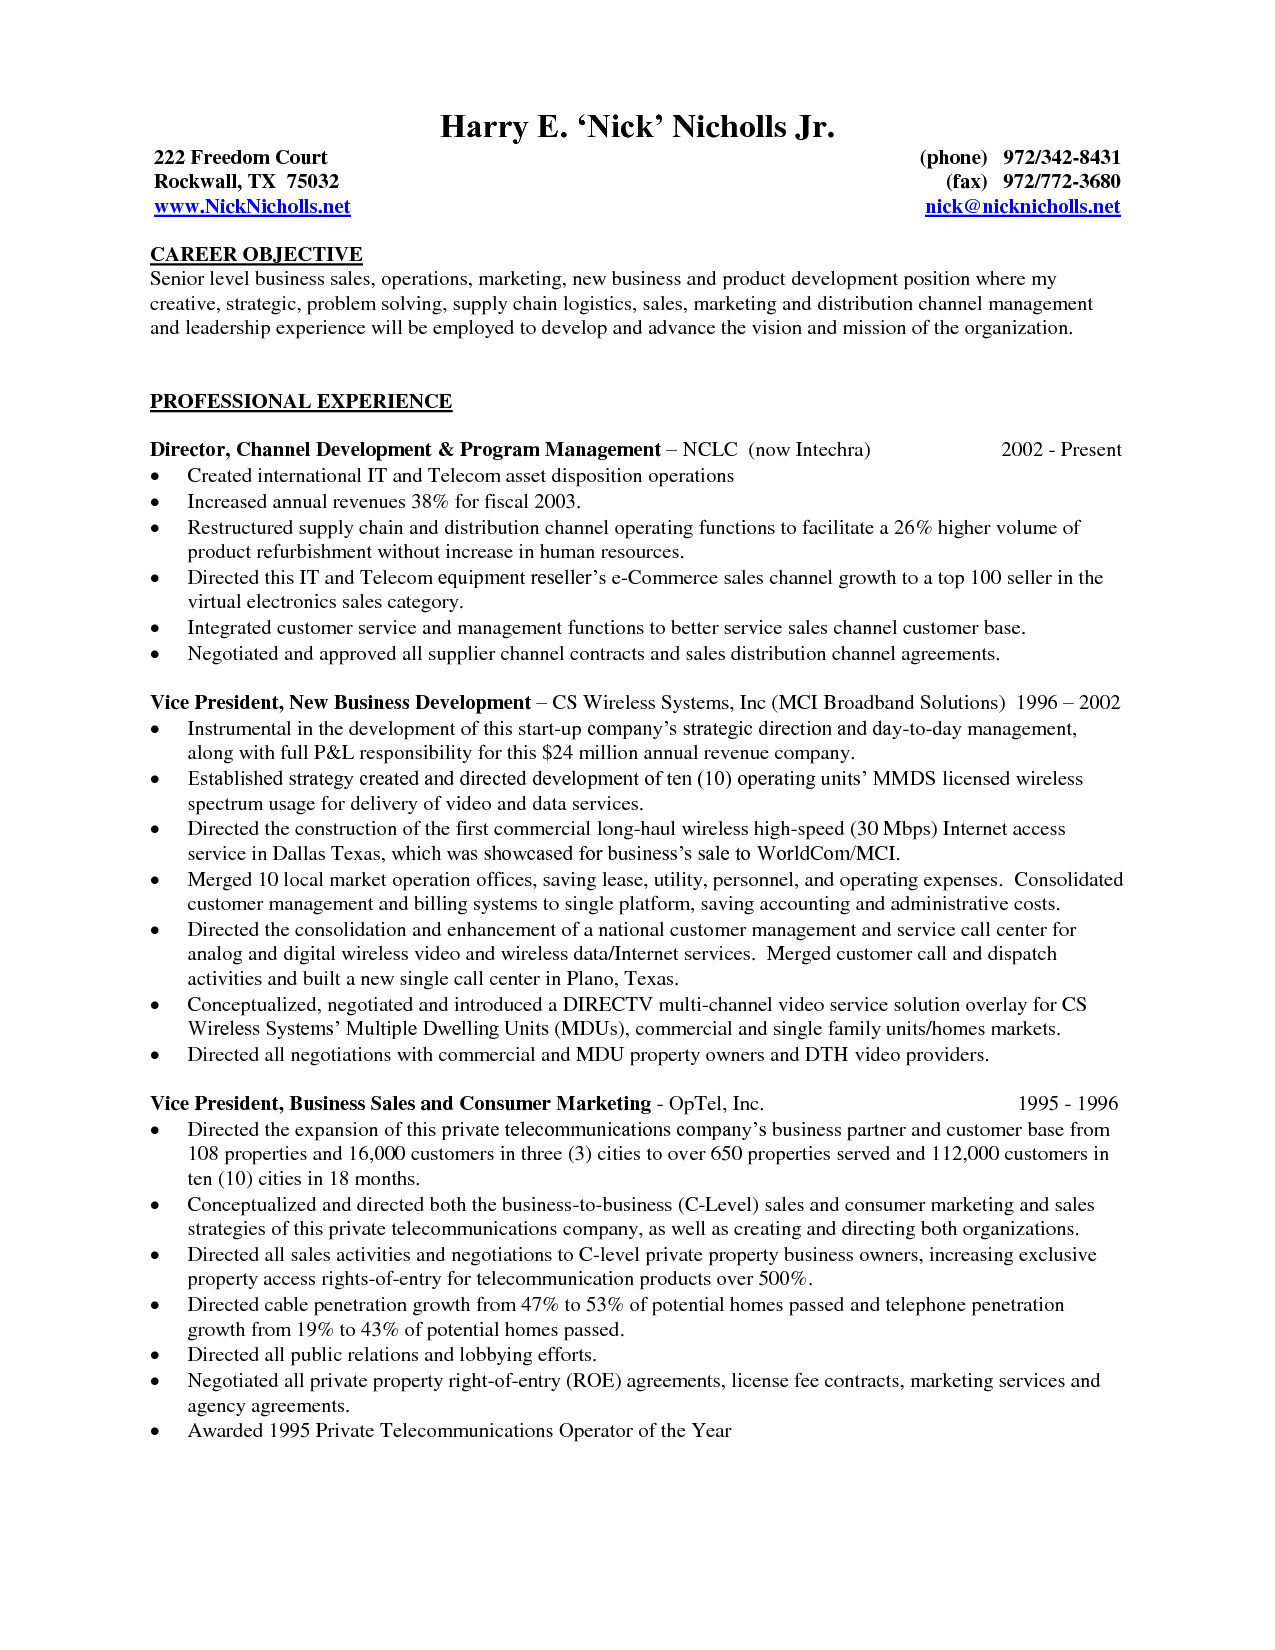 Objective Resume Ideas Manager Resume Objective Best Of Supply Chain Manager Resume